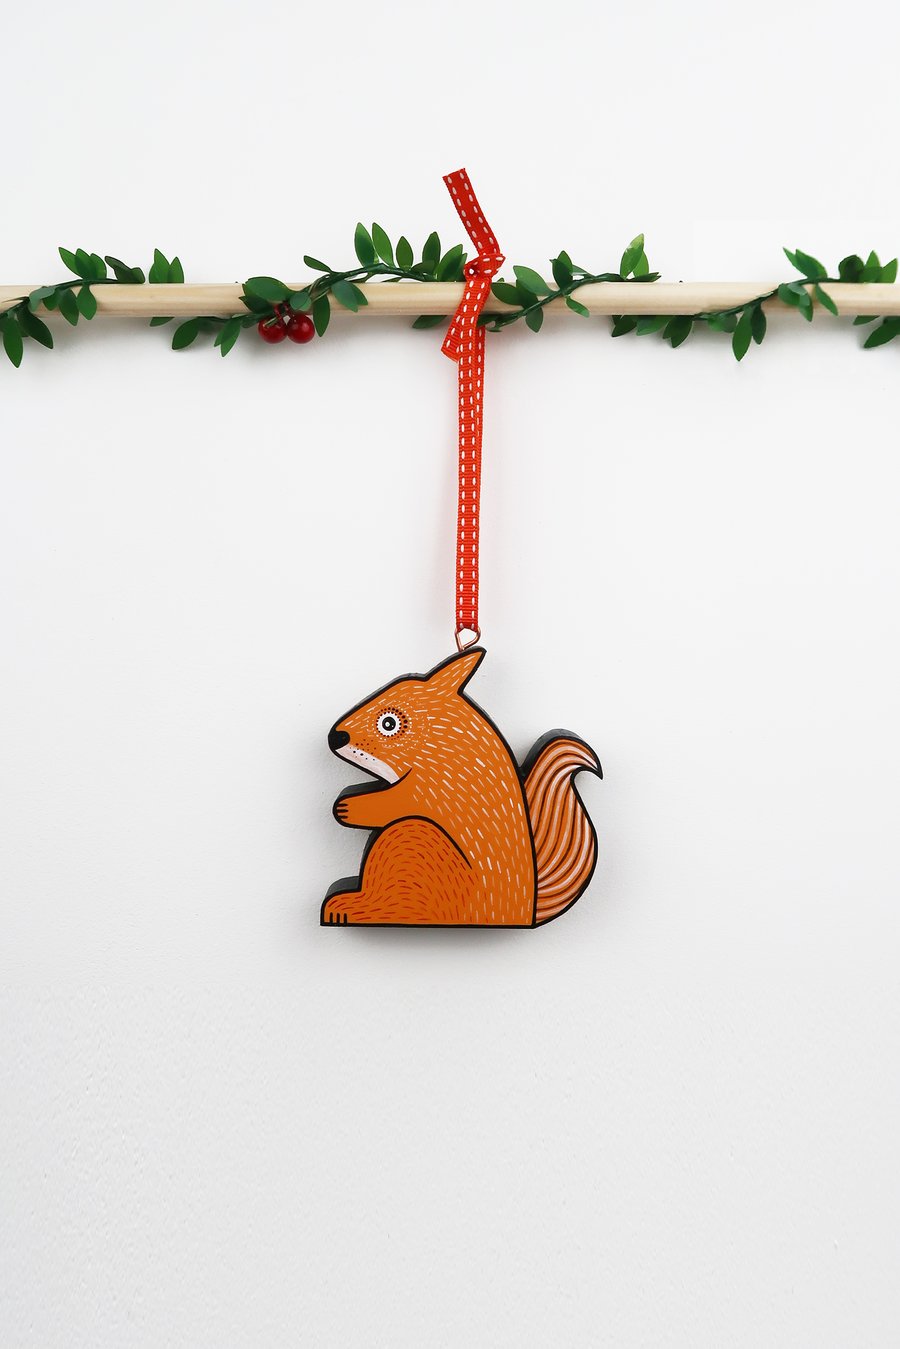 Squirrel hanging ornament, forest theme Christmas tree decoration.